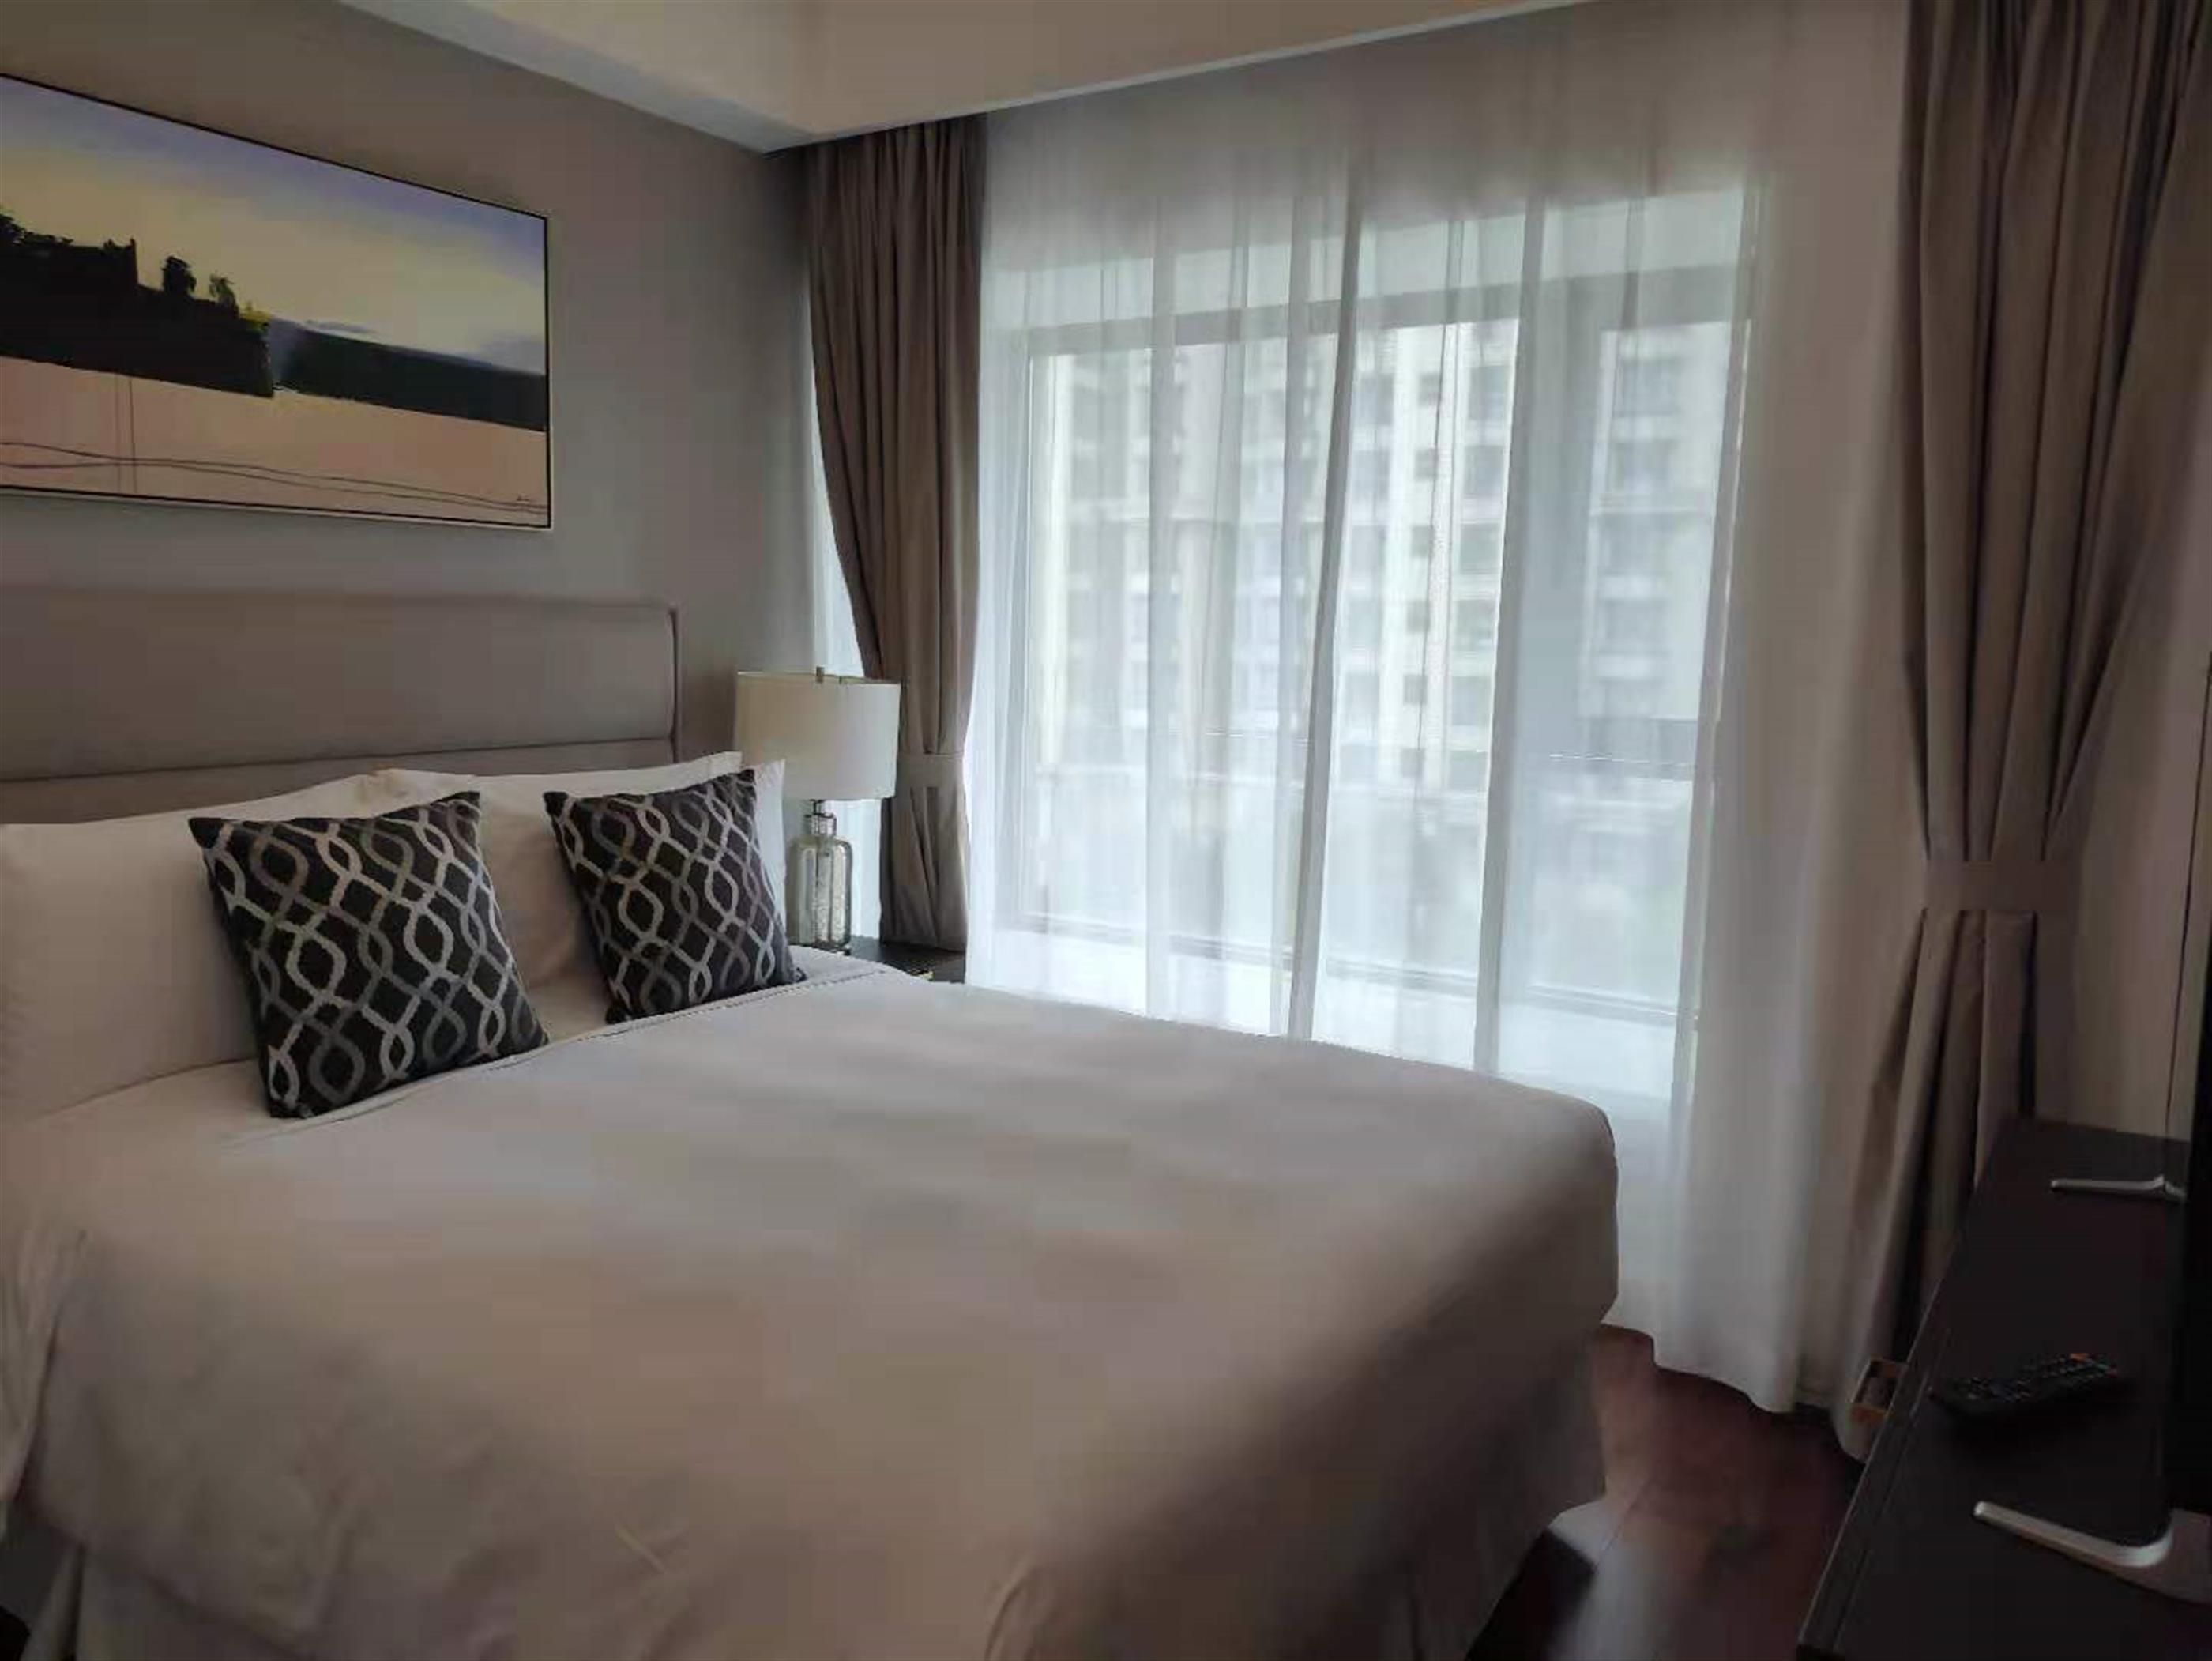 2nd bedroom Luxurious FFC 3BR+Office Service Apartment nr LN 1/9/10/12 for Rent in Shanghai